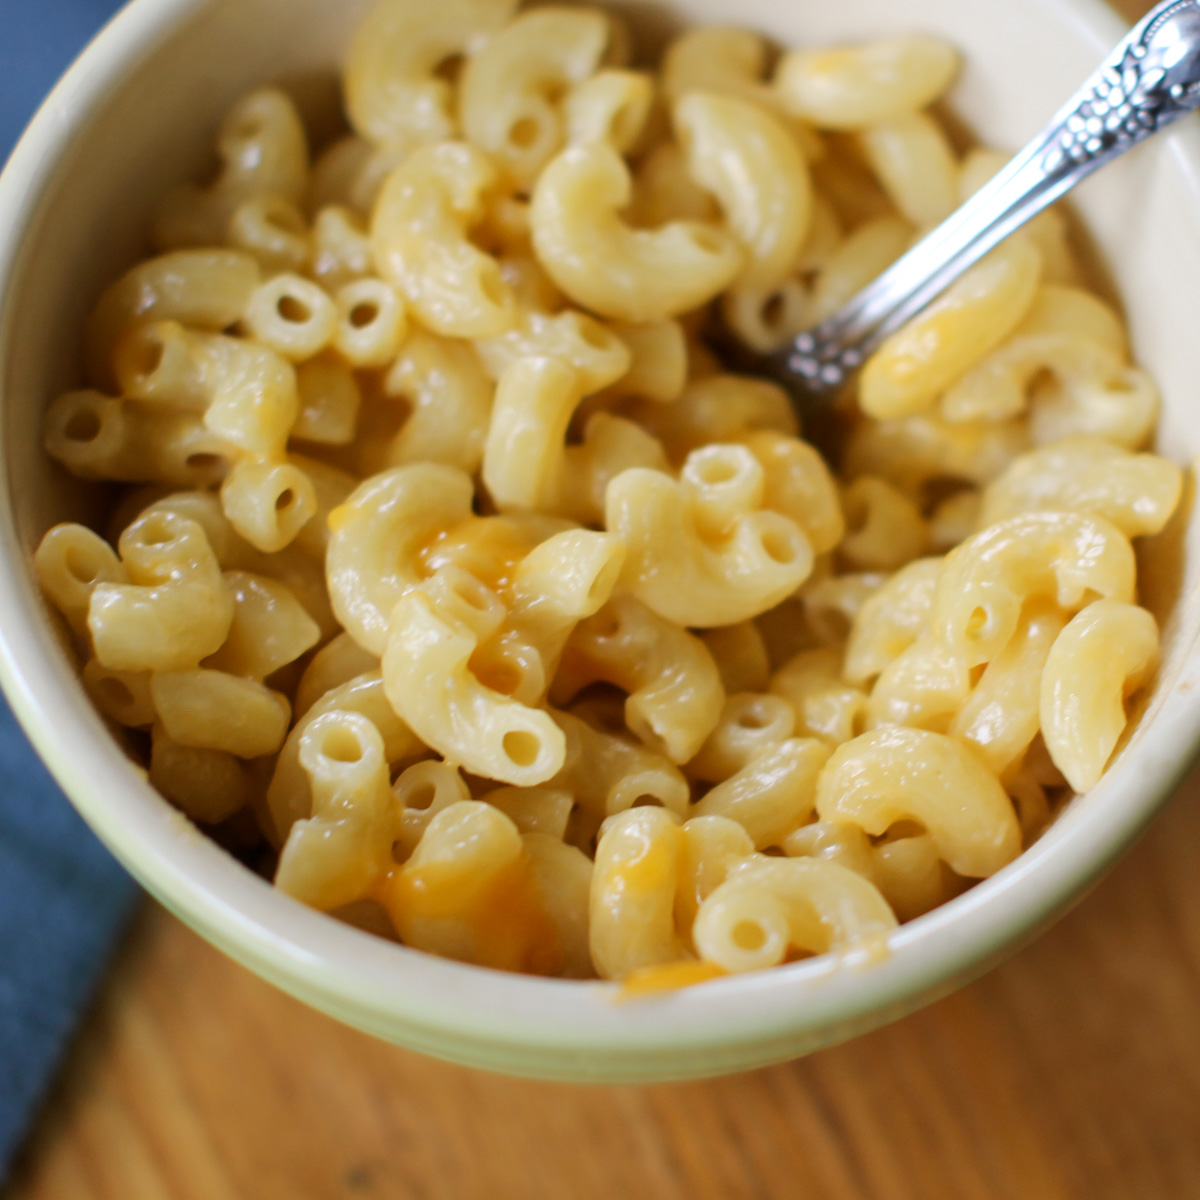 A small bowl of mac and cheese made with yogurt and shredded cheese.